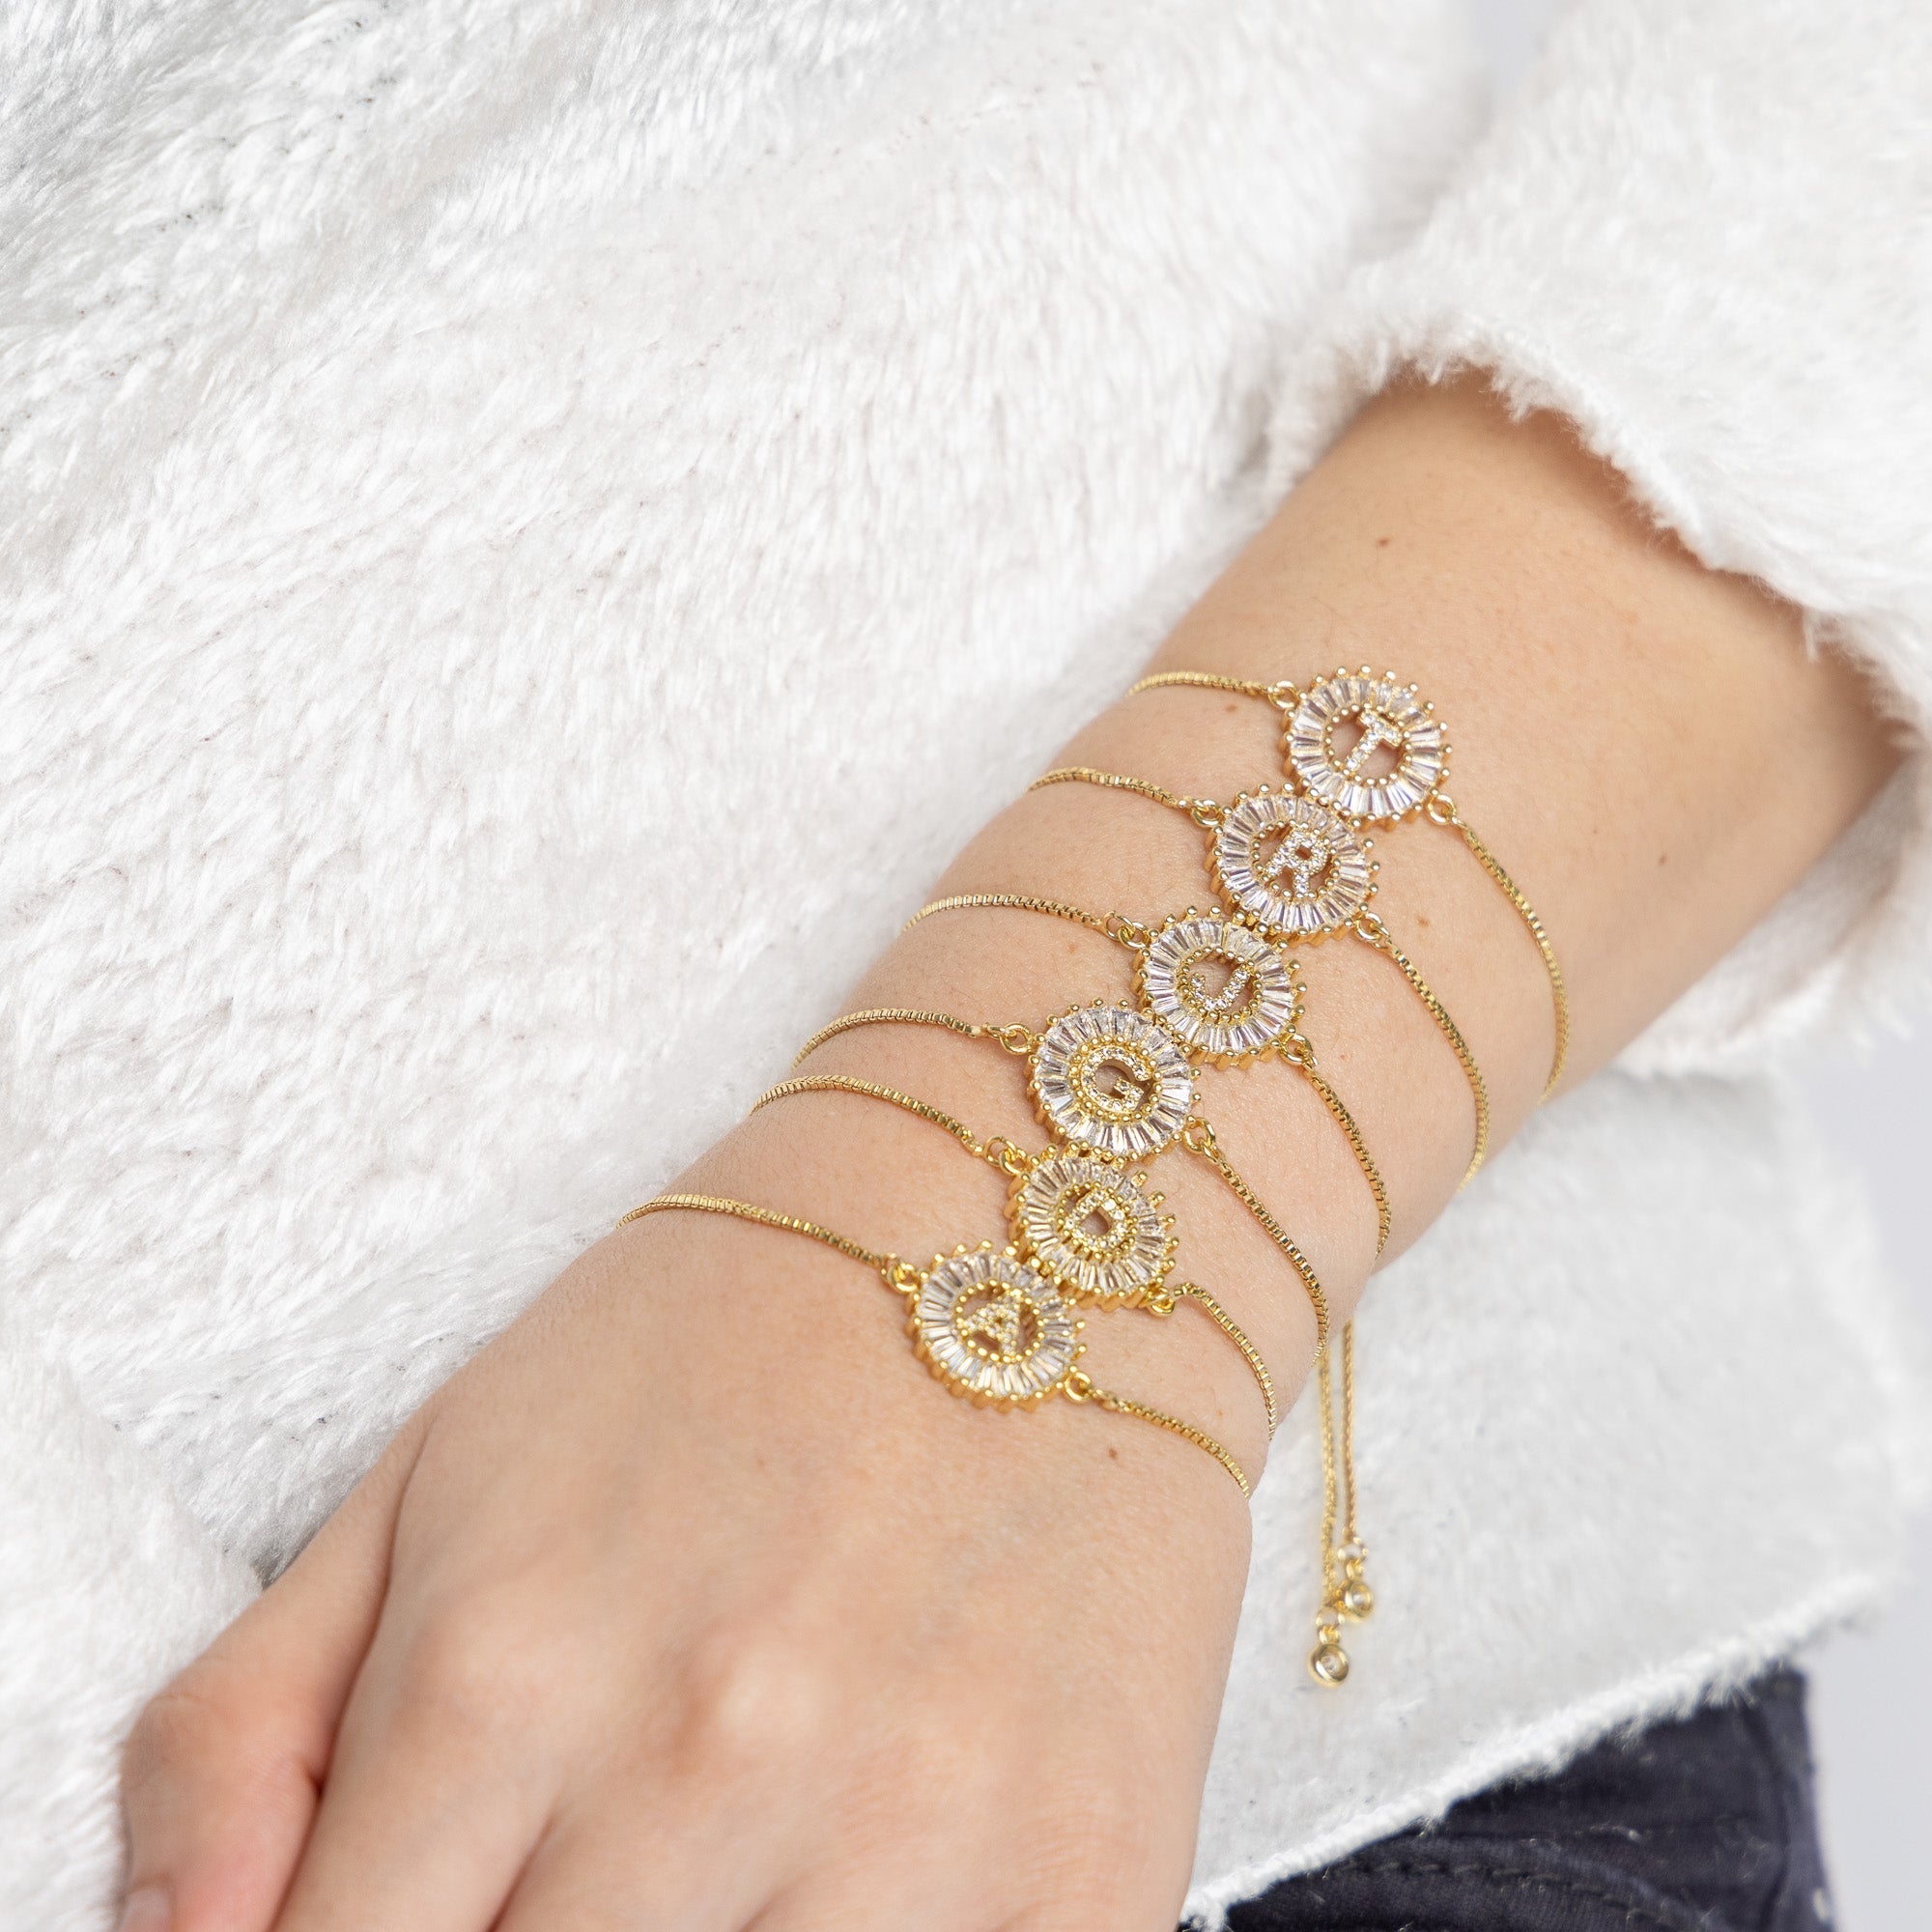 The Personalised Initial Necklace/bracelet - Upakarna The Personalised Initial Necklace/bracelet A Necklace Bracelet Drawstring bracelets Golden 3